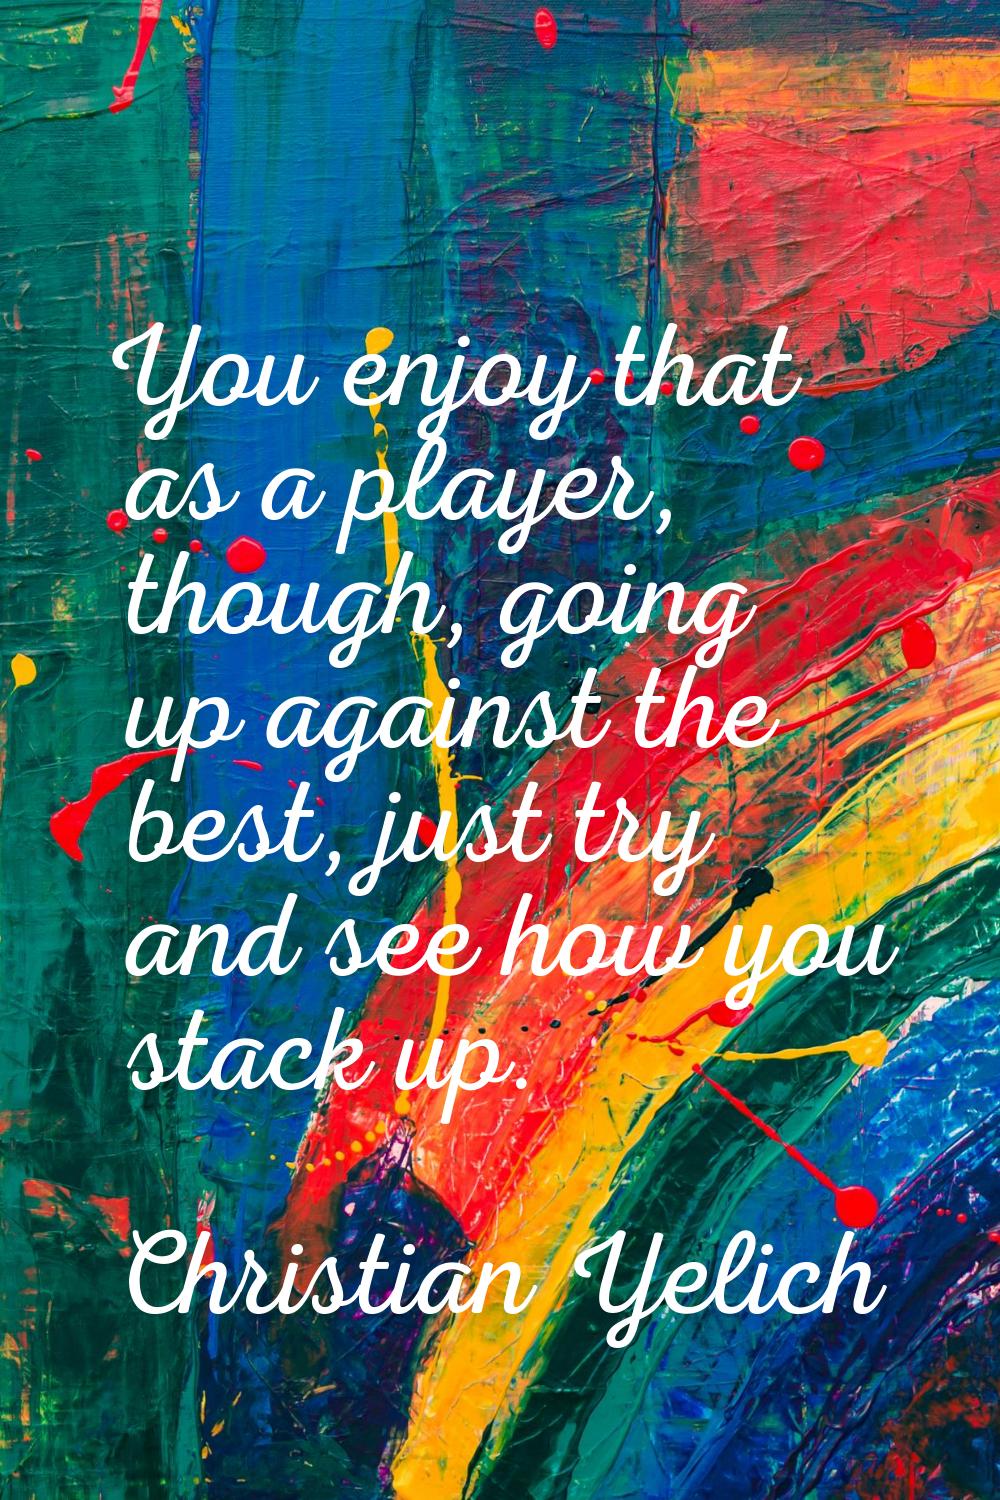 You enjoy that as a player, though, going up against the best, just try and see how you stack up.